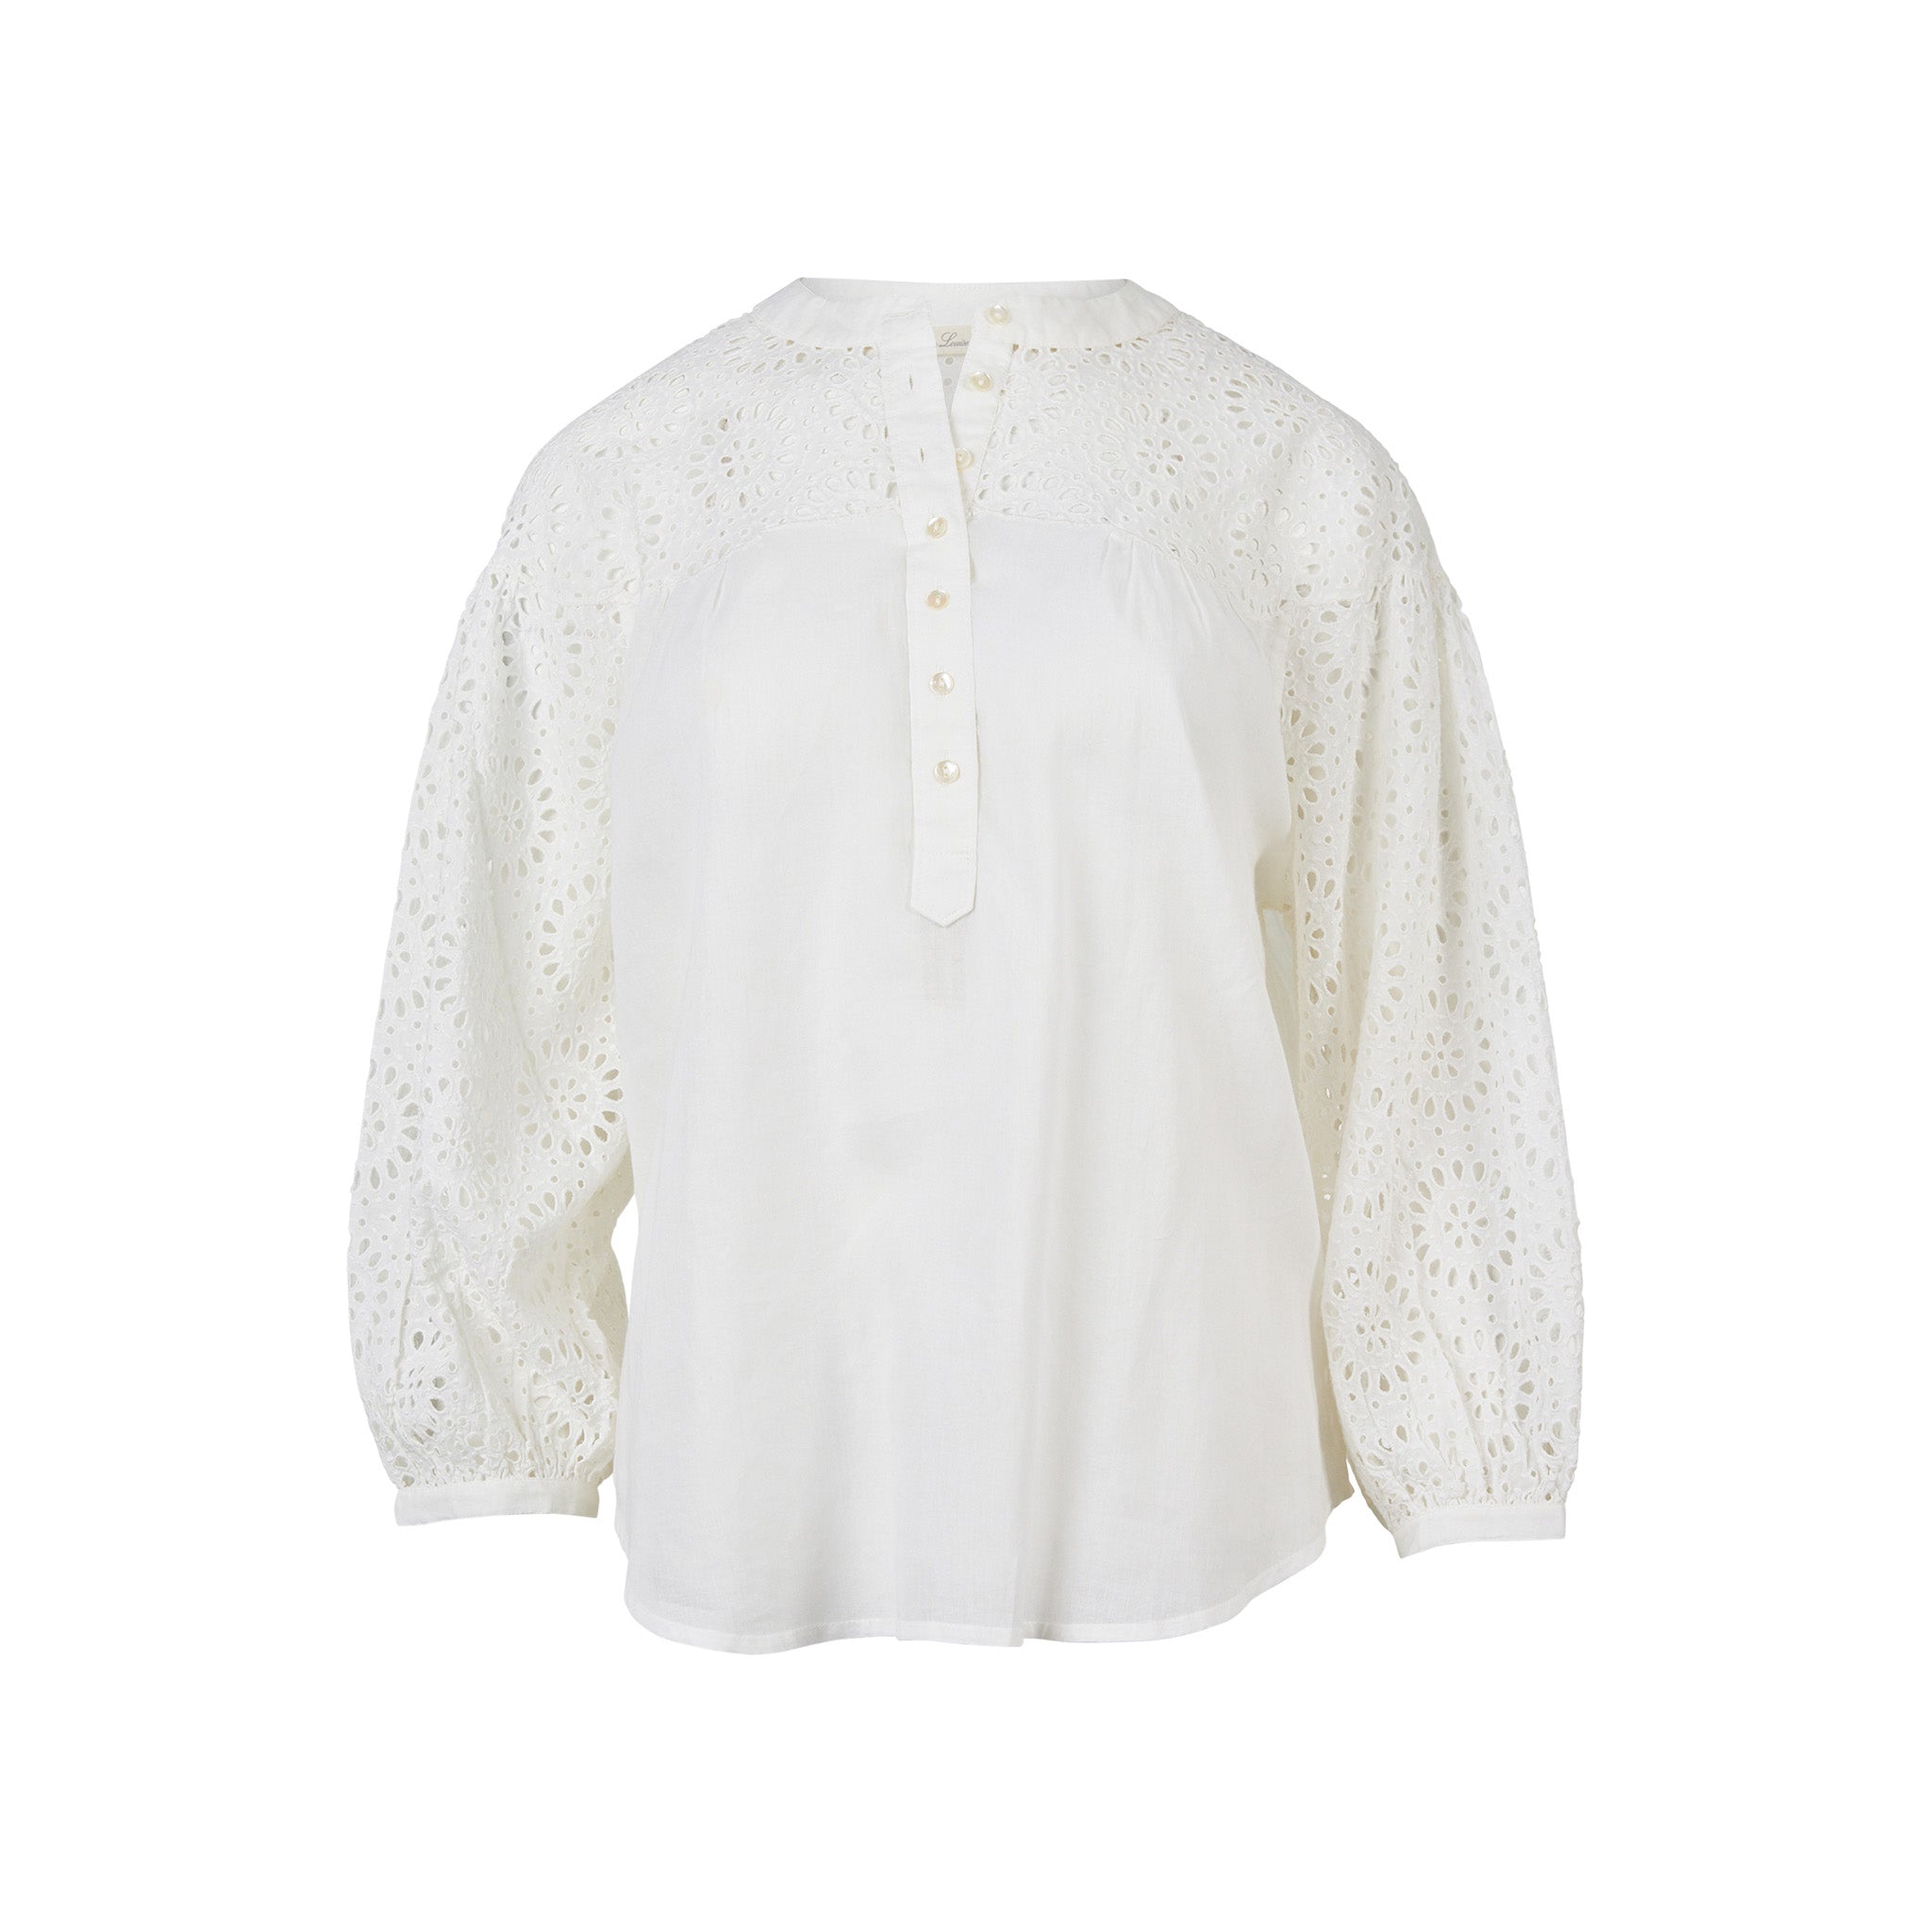 CIRCLE LACE BLOUSE IN CHALK